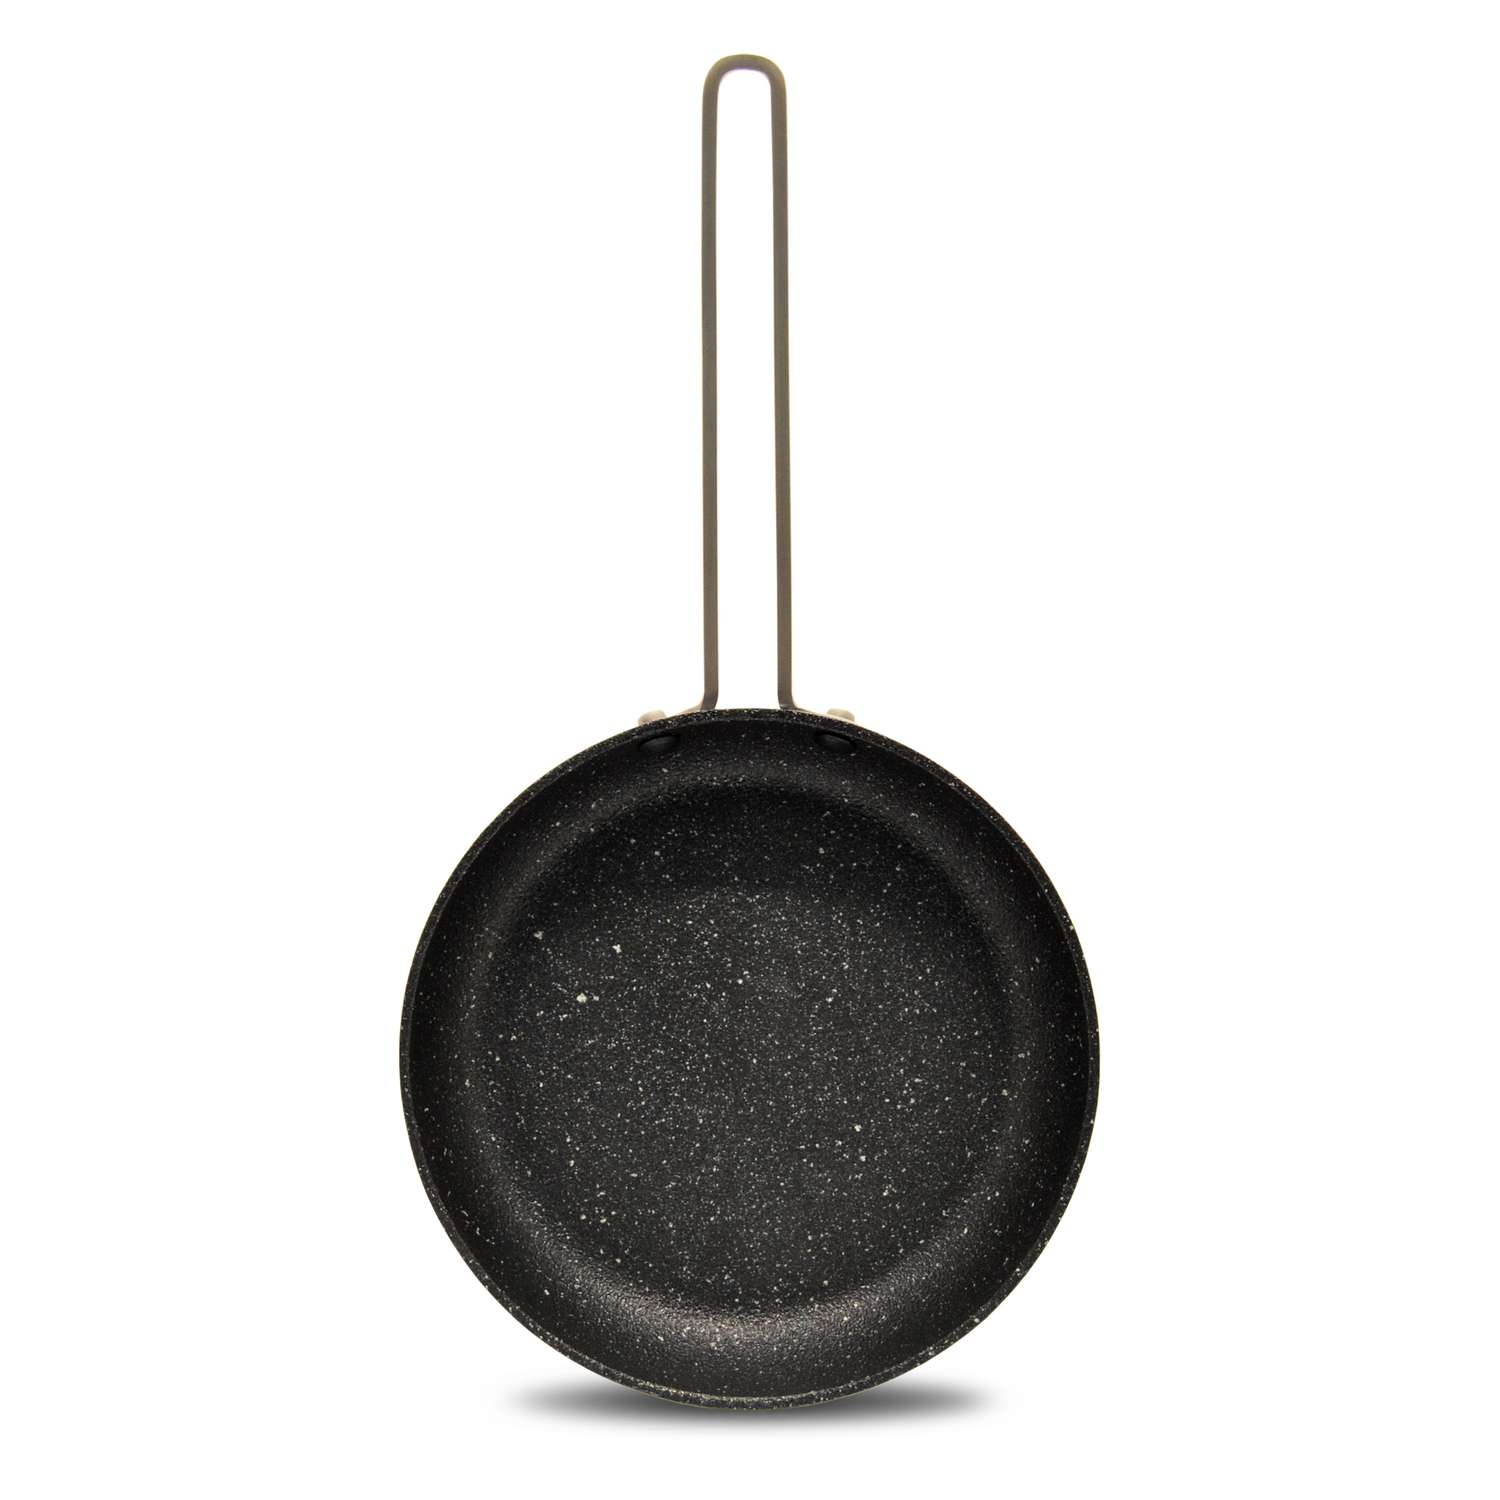 The Rock by Starfrit 2-Piece Fry Pan Set